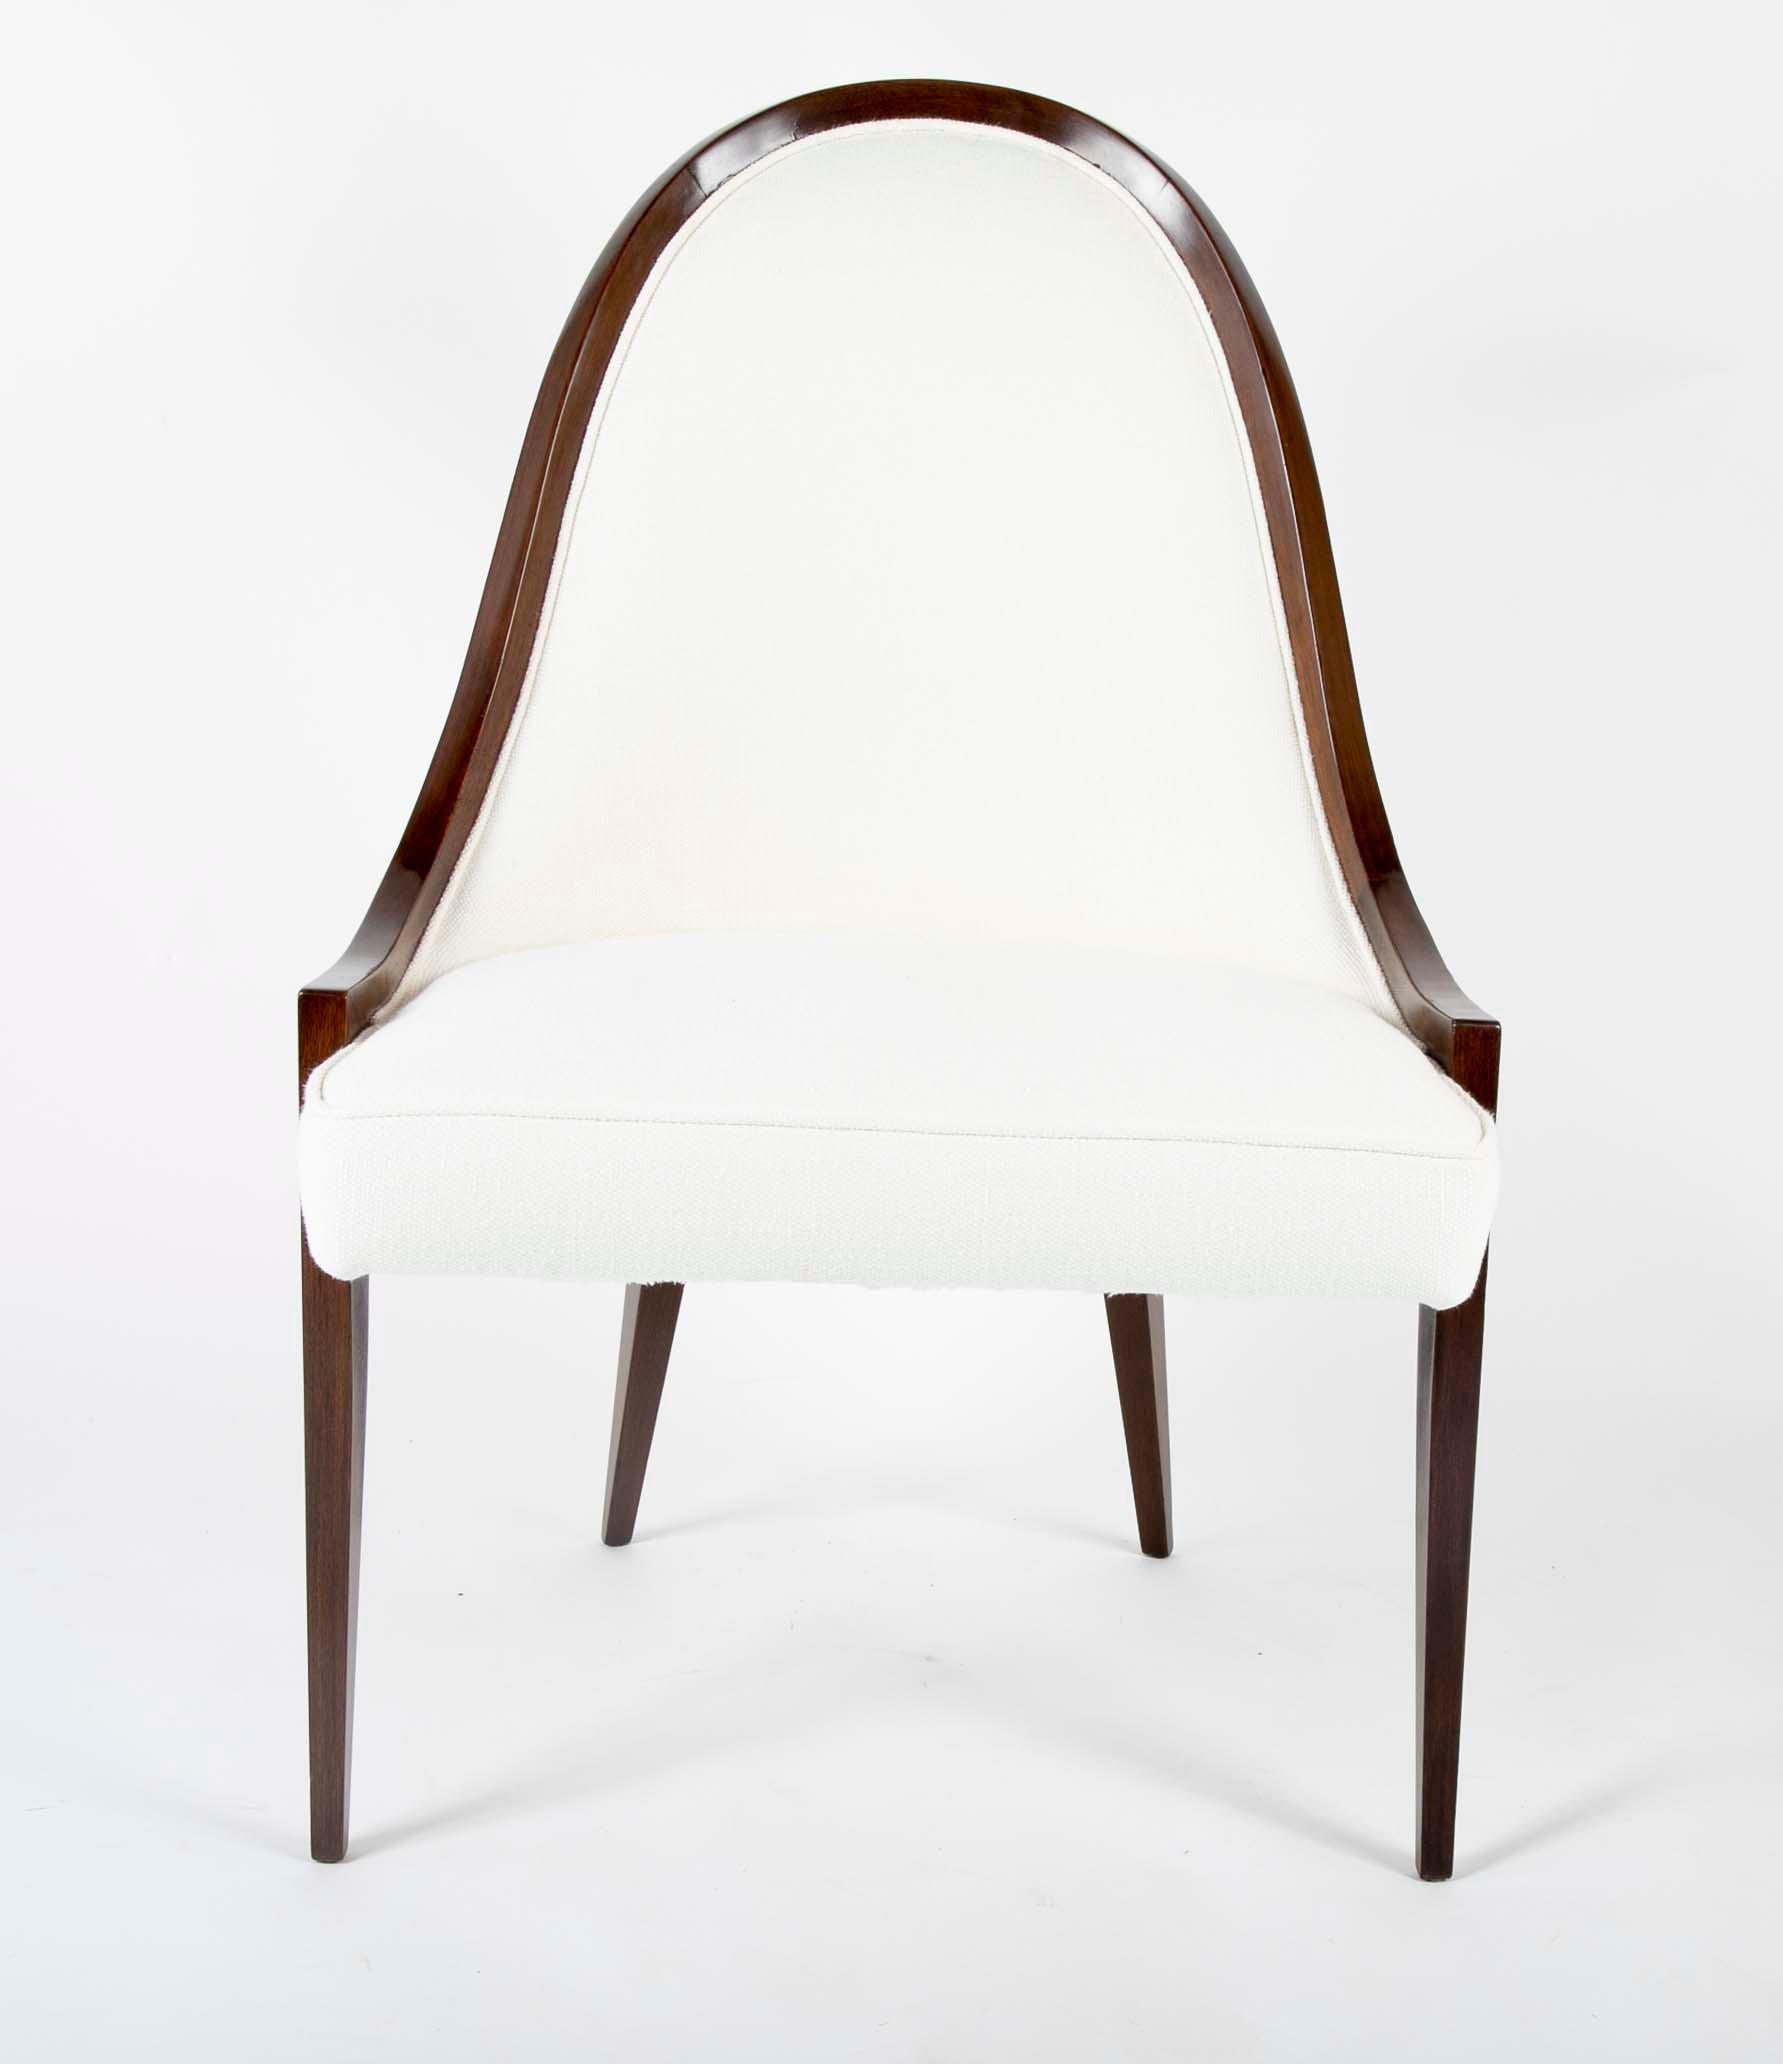 Walnut chair designed by Harvey Probber. Newly upholstered.
Measures: Seat height 18.5